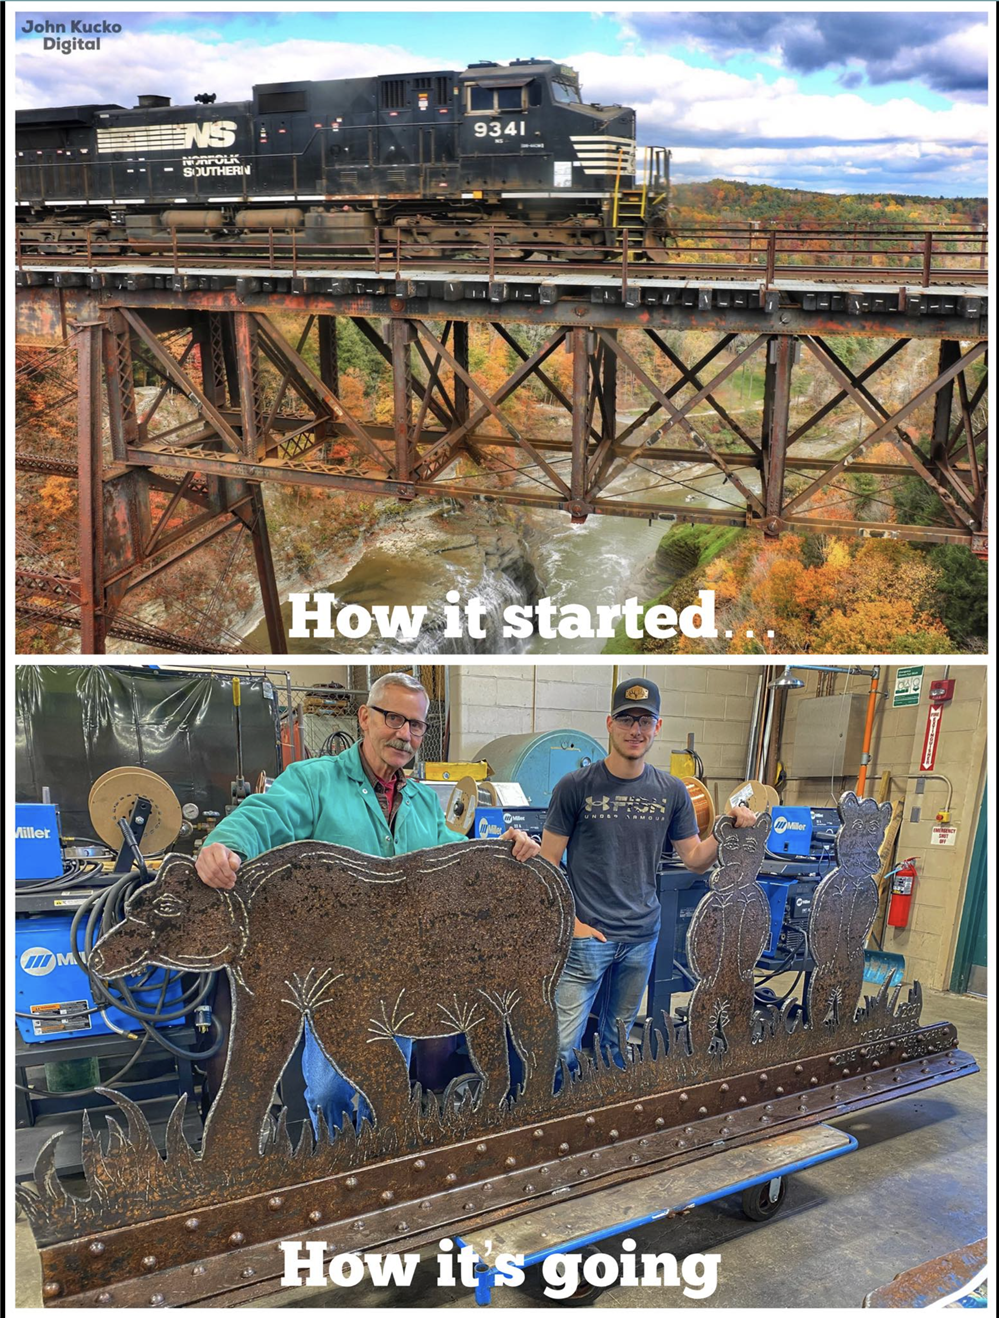  Images for the original train track and how the iron has been repurposed to create sculptures. 